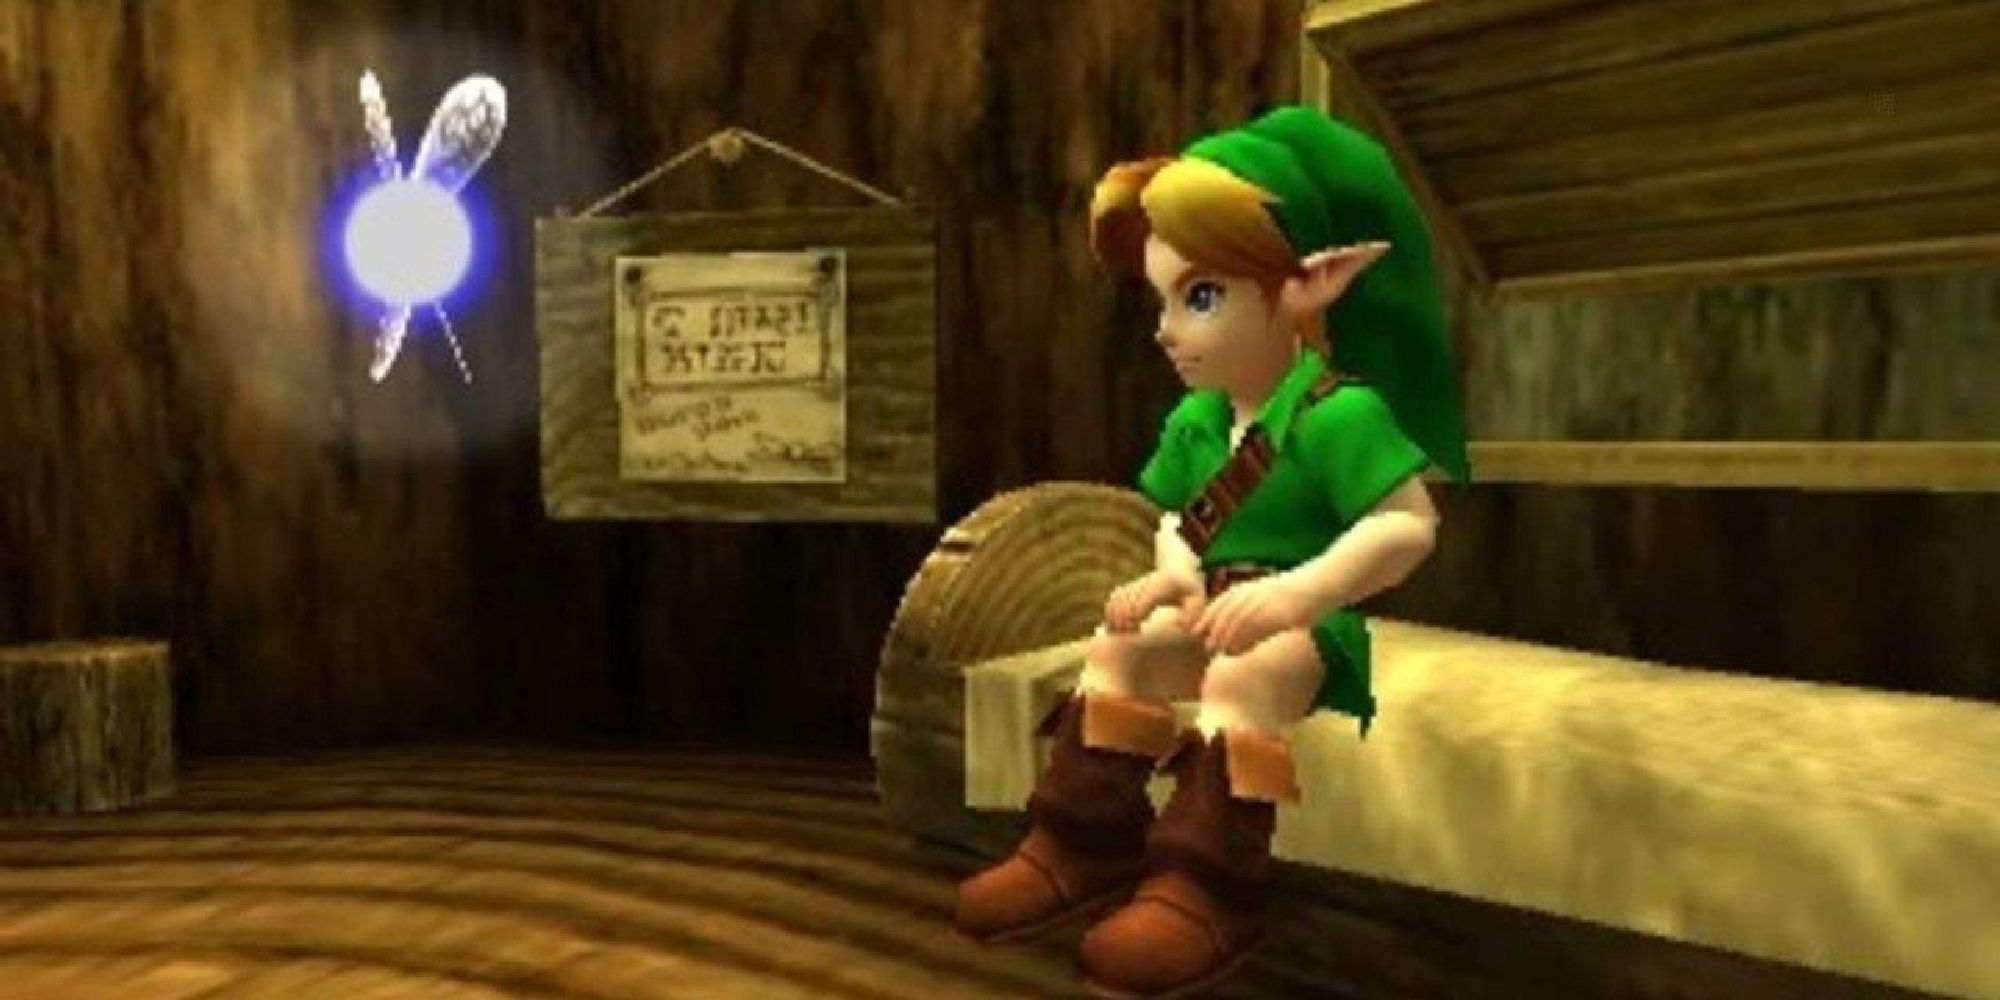 Navi and Link in Link's house in Kokiri Forest in The Legend Of Zelda: Ocarina of Time.